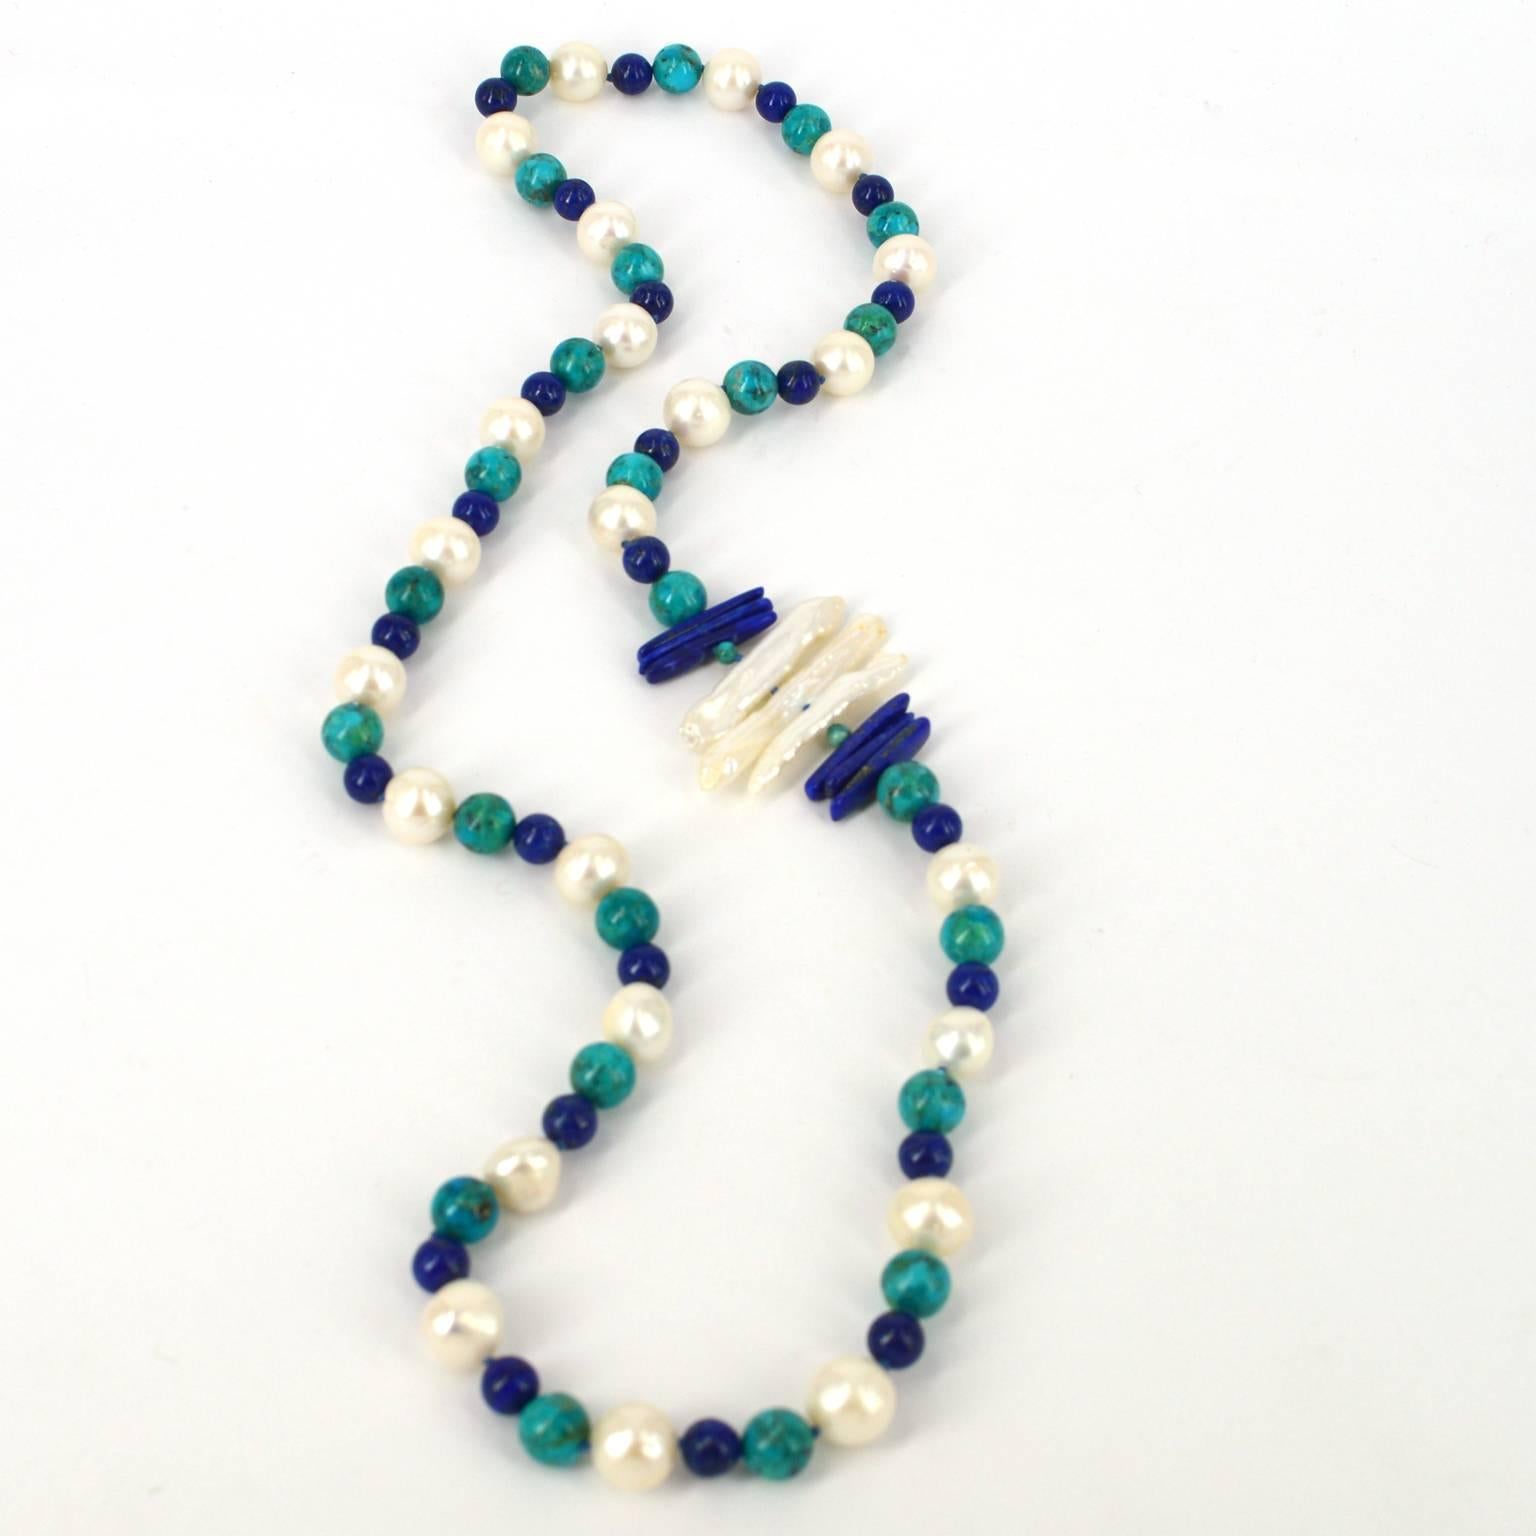 Copella, magical depths of colour, designed with natural stones and pearls to excite your passions. Hand Knotted natural 10mm Chinese Turquoise, 8mm Lapis Lazuli with 12mm Fresh Water Pearls and Biwa  pearls.  8mm brushed Sterling Silver